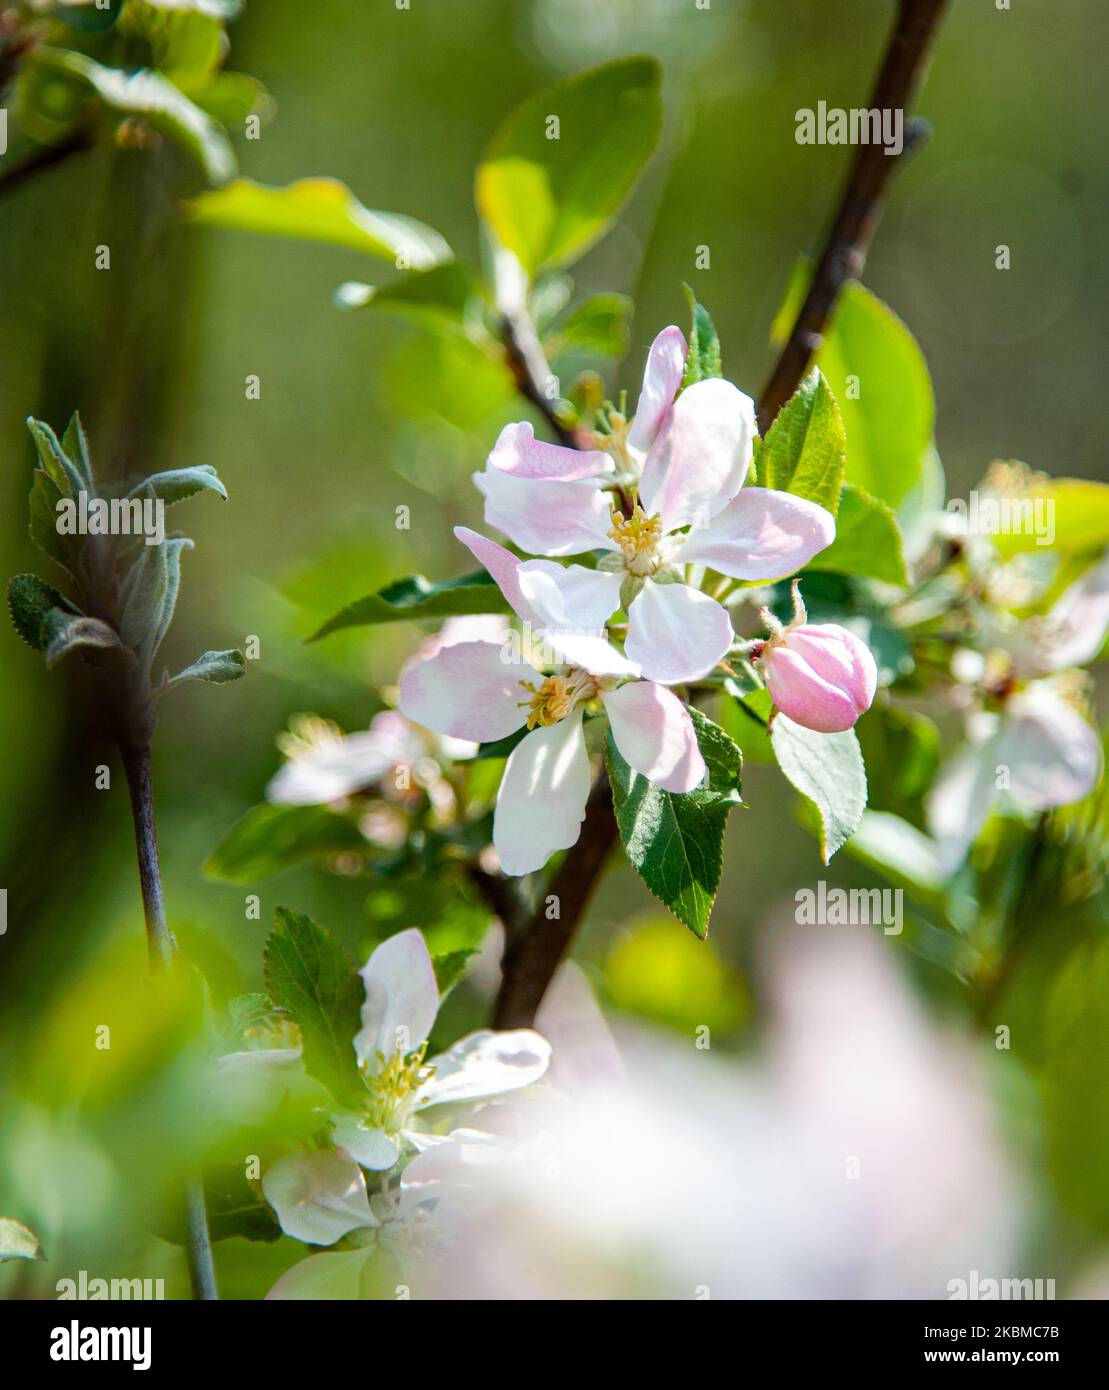 Blossomed Gravenstein. Nature in Bulgaria is awakening a bit earlier this year due to the warm winter. Many people who stay at home because of the coronavirus quarantine try gardening in their backyards or terraces, Varna, Bulgaria on April 13, 2020 (Photo by Hristo Rusev/NurPhoto) Stock Photo